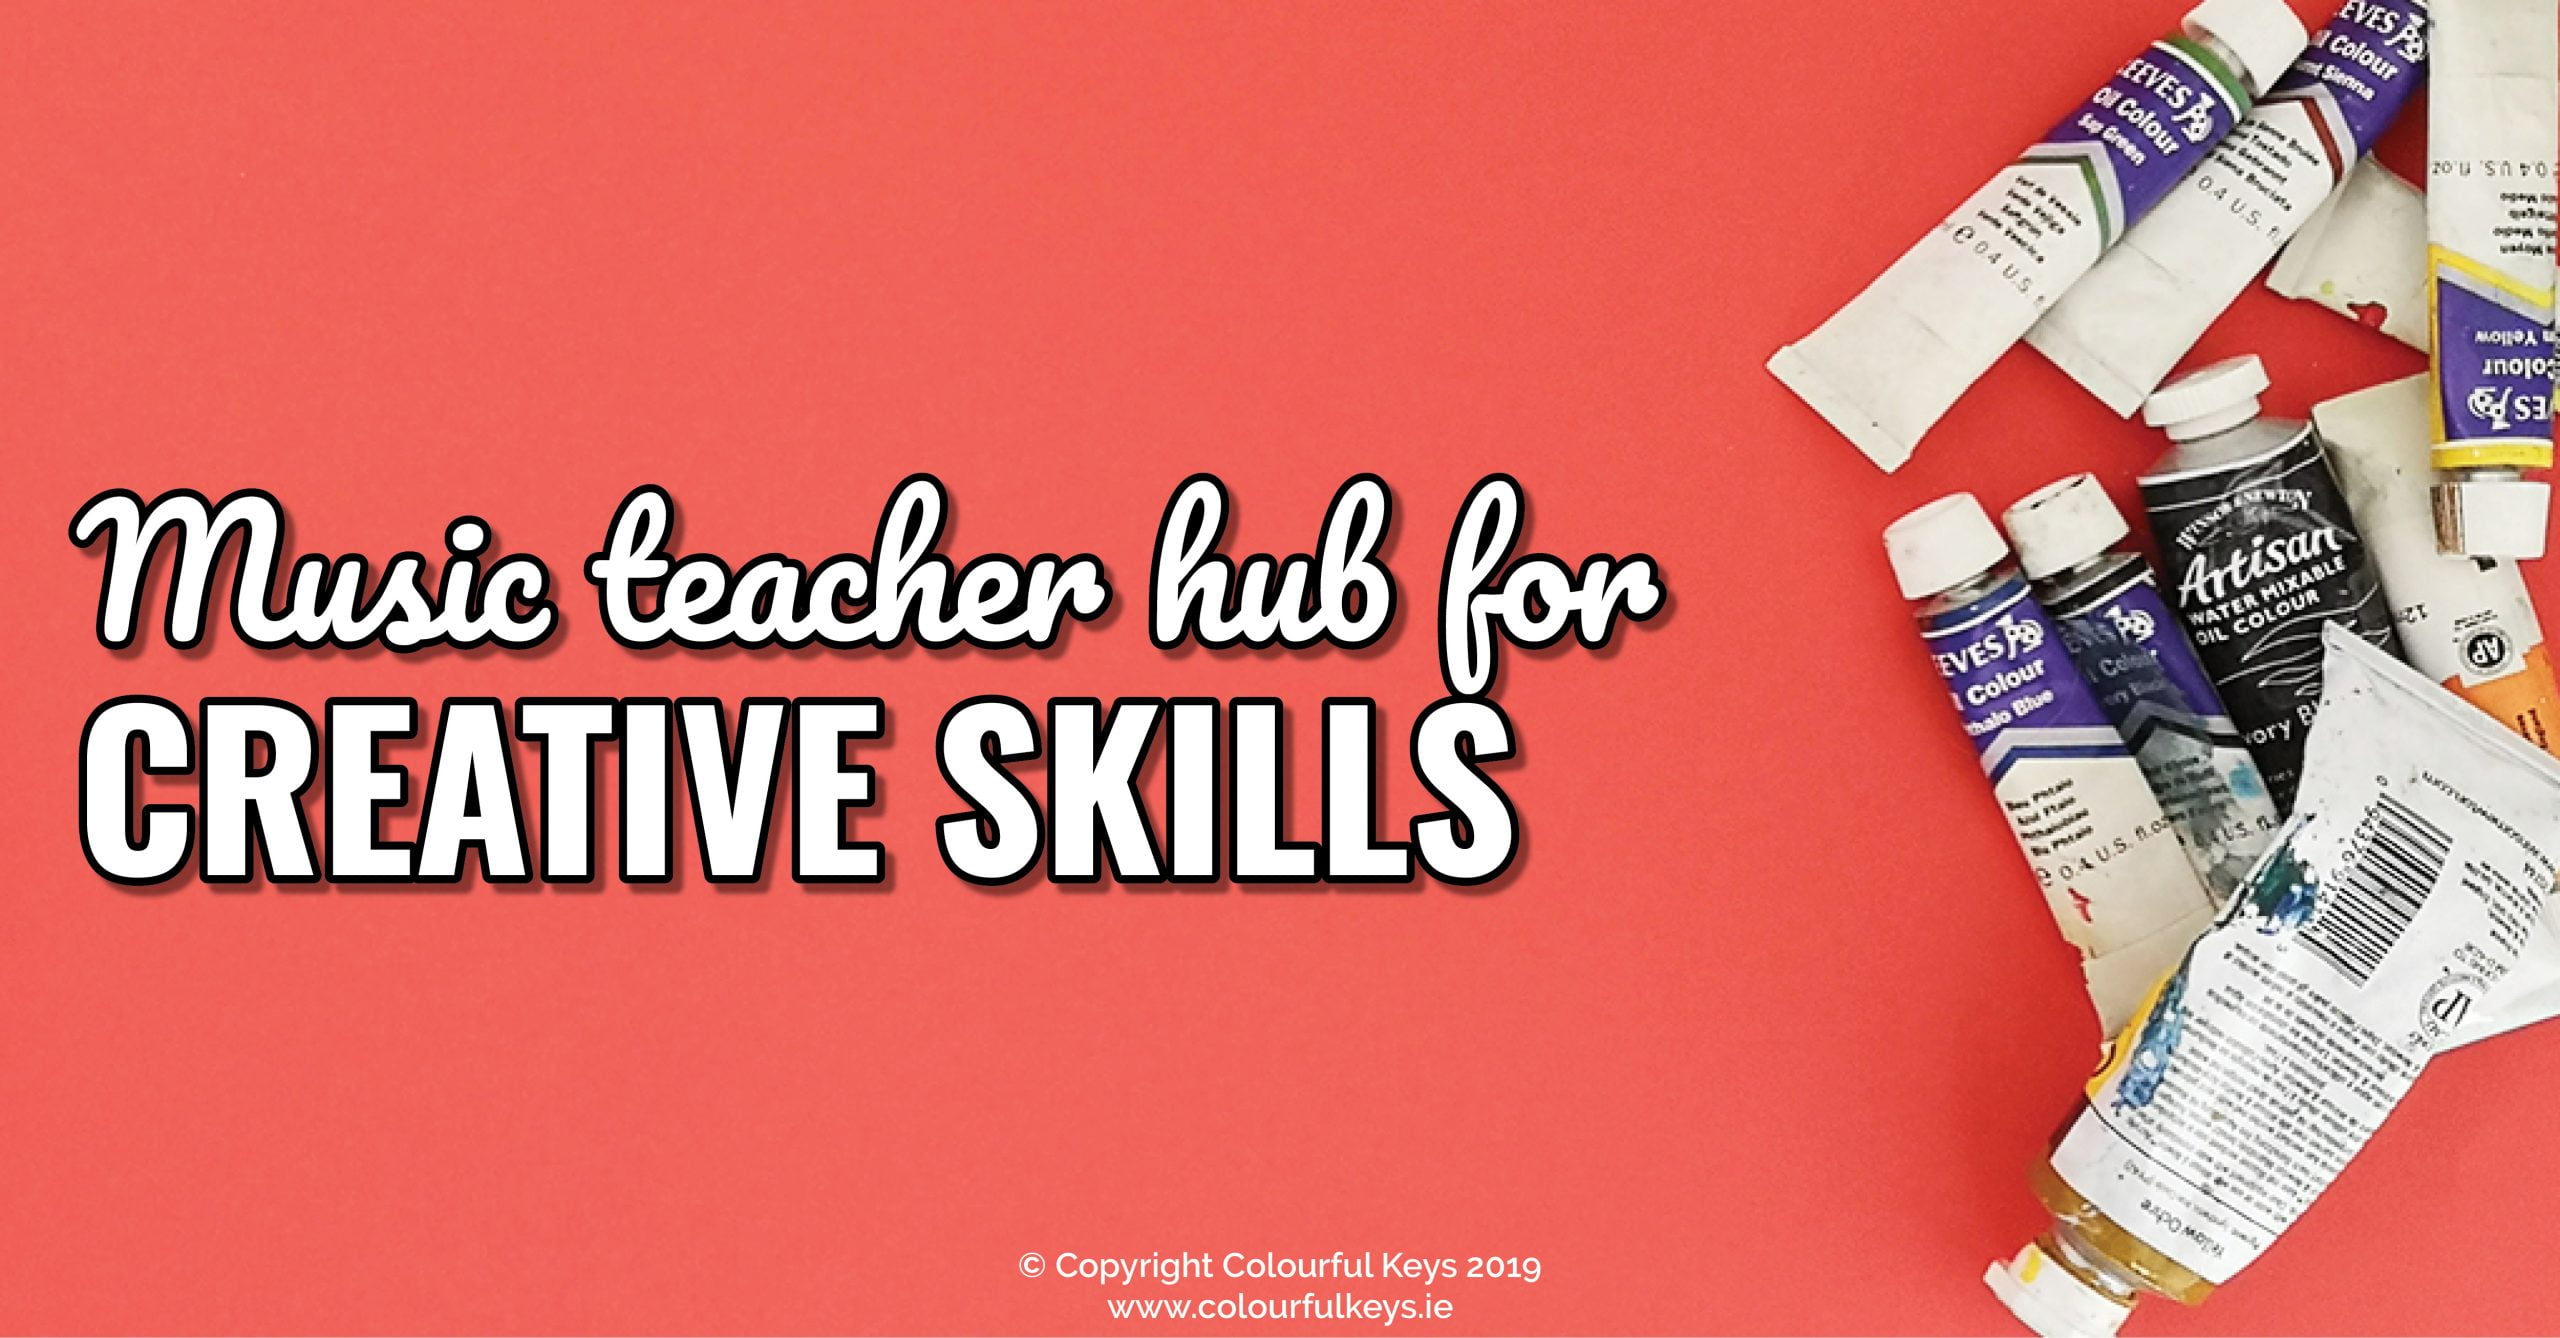 Creative Music Skills – a central hub page for music teachers